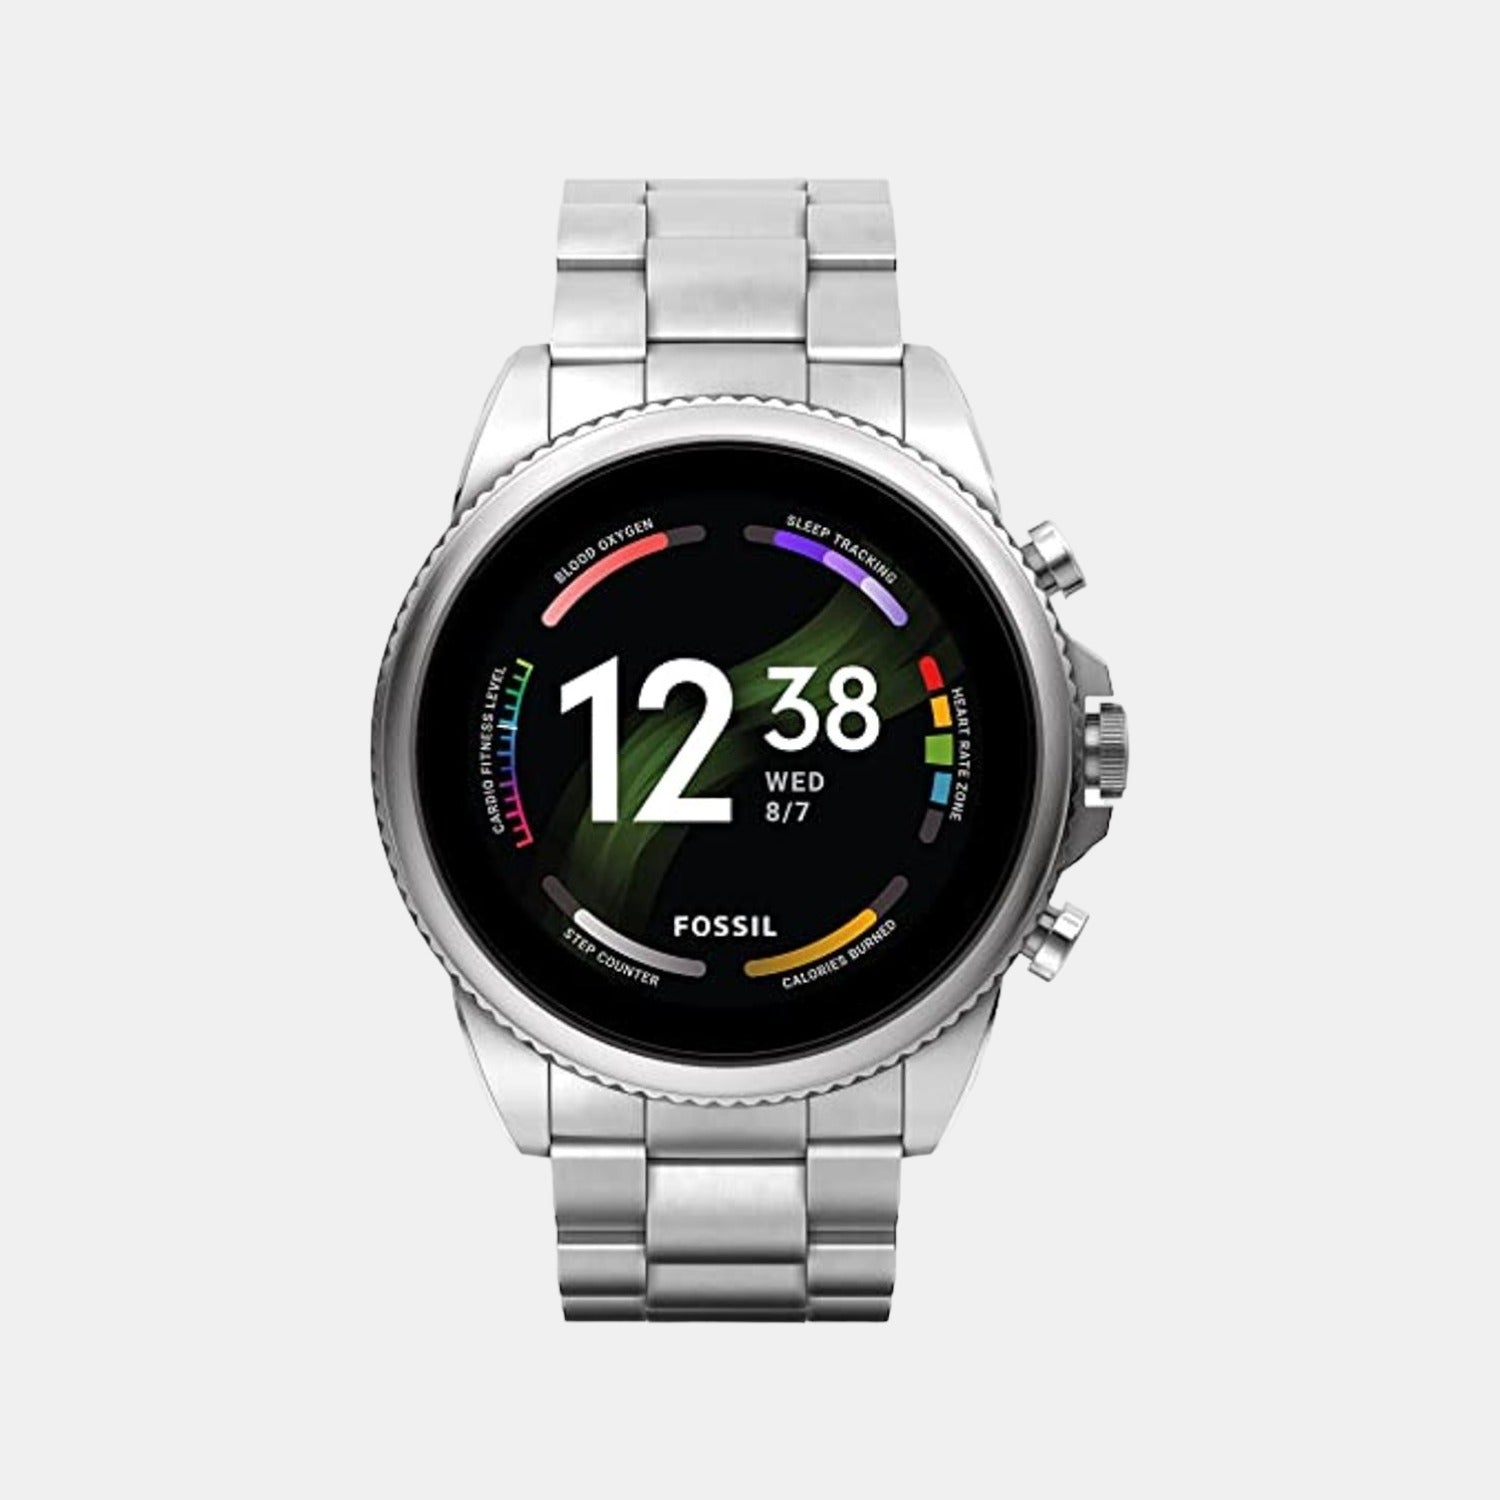 Fire-Boltt Ring 3 Smart Watch 1.8 Biggest Display with Advanced Bluetooth  Calling Chip, Voice Assistance,118 Sports Modes, in Built Calculator &  Games, SpO2, Heart Rate Monitoring - ITPortal.co.in